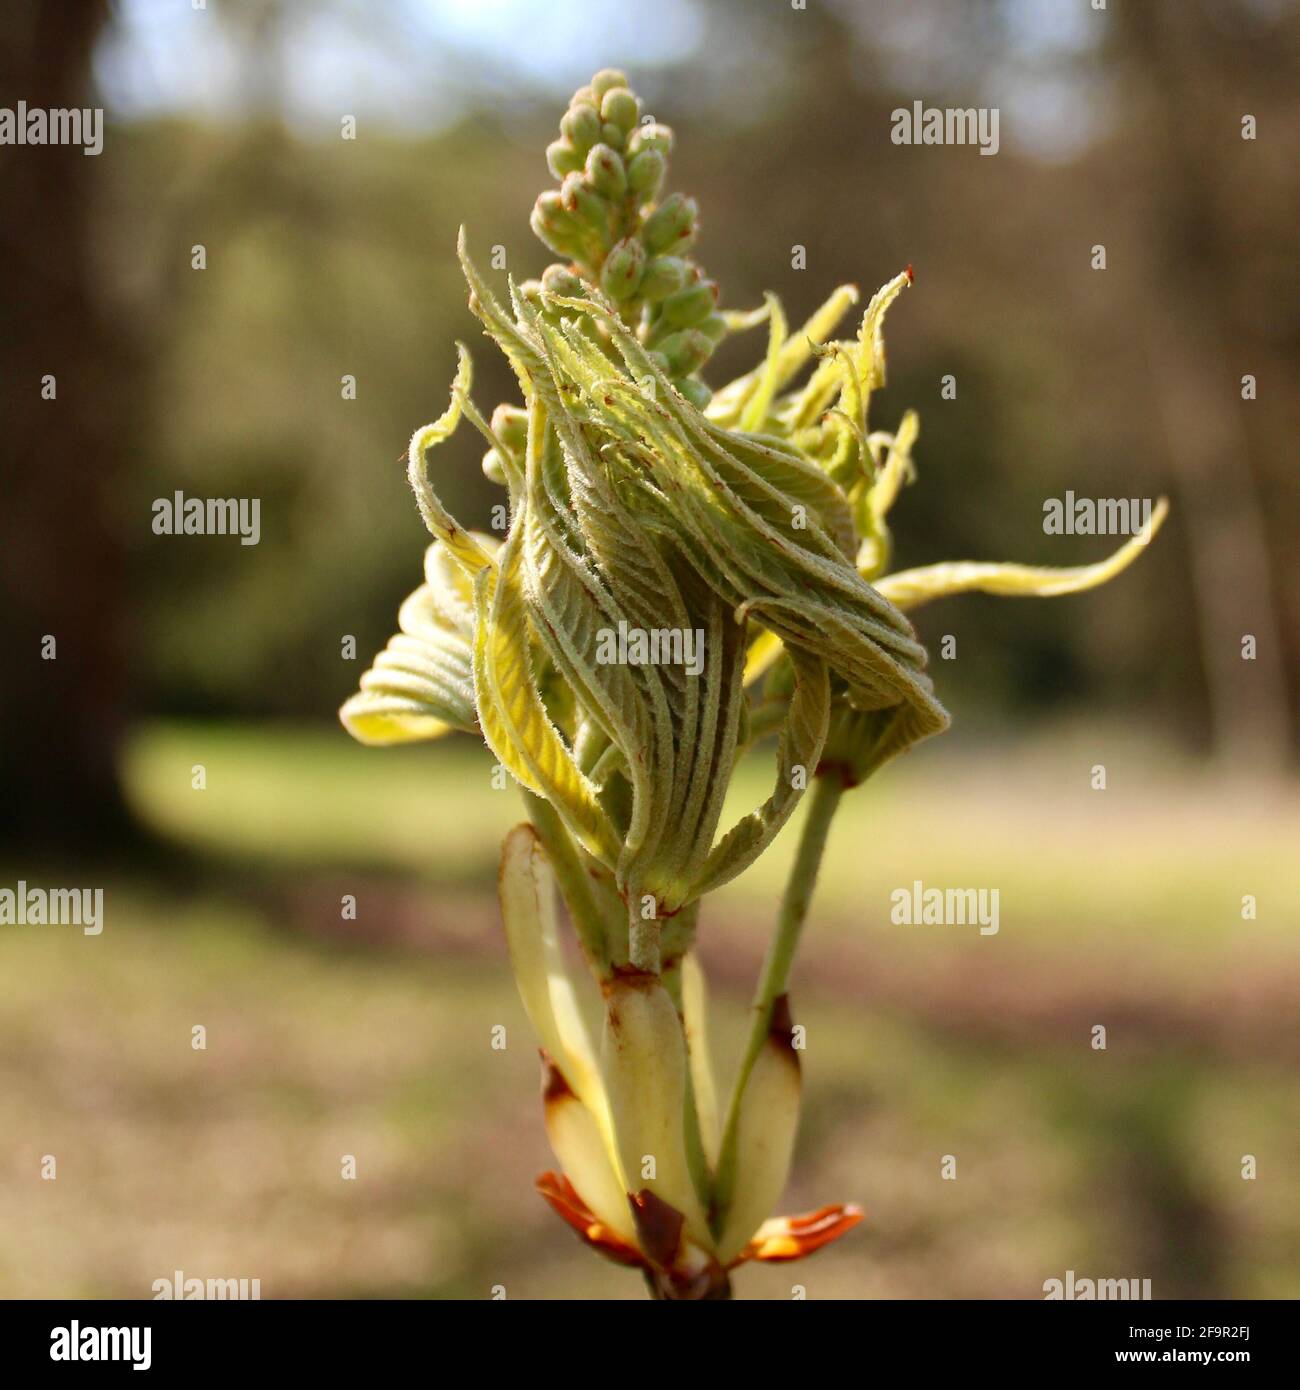 Spring time scene in England of the leaves of a chestnut tree slowly unfurling. Stock Photo